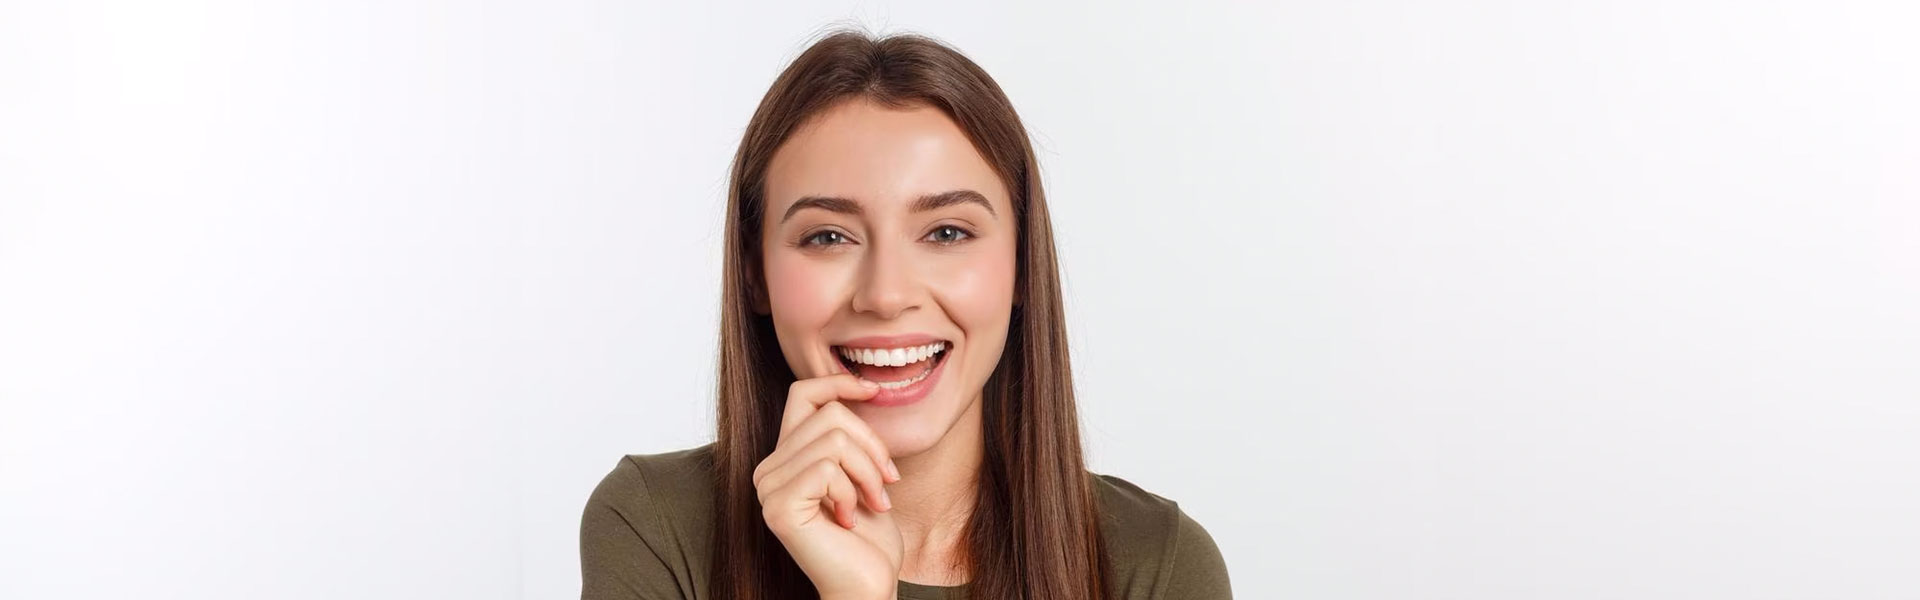 Revealing Your Brightest Smile with Teeth Whitening in Newton Falls, OH